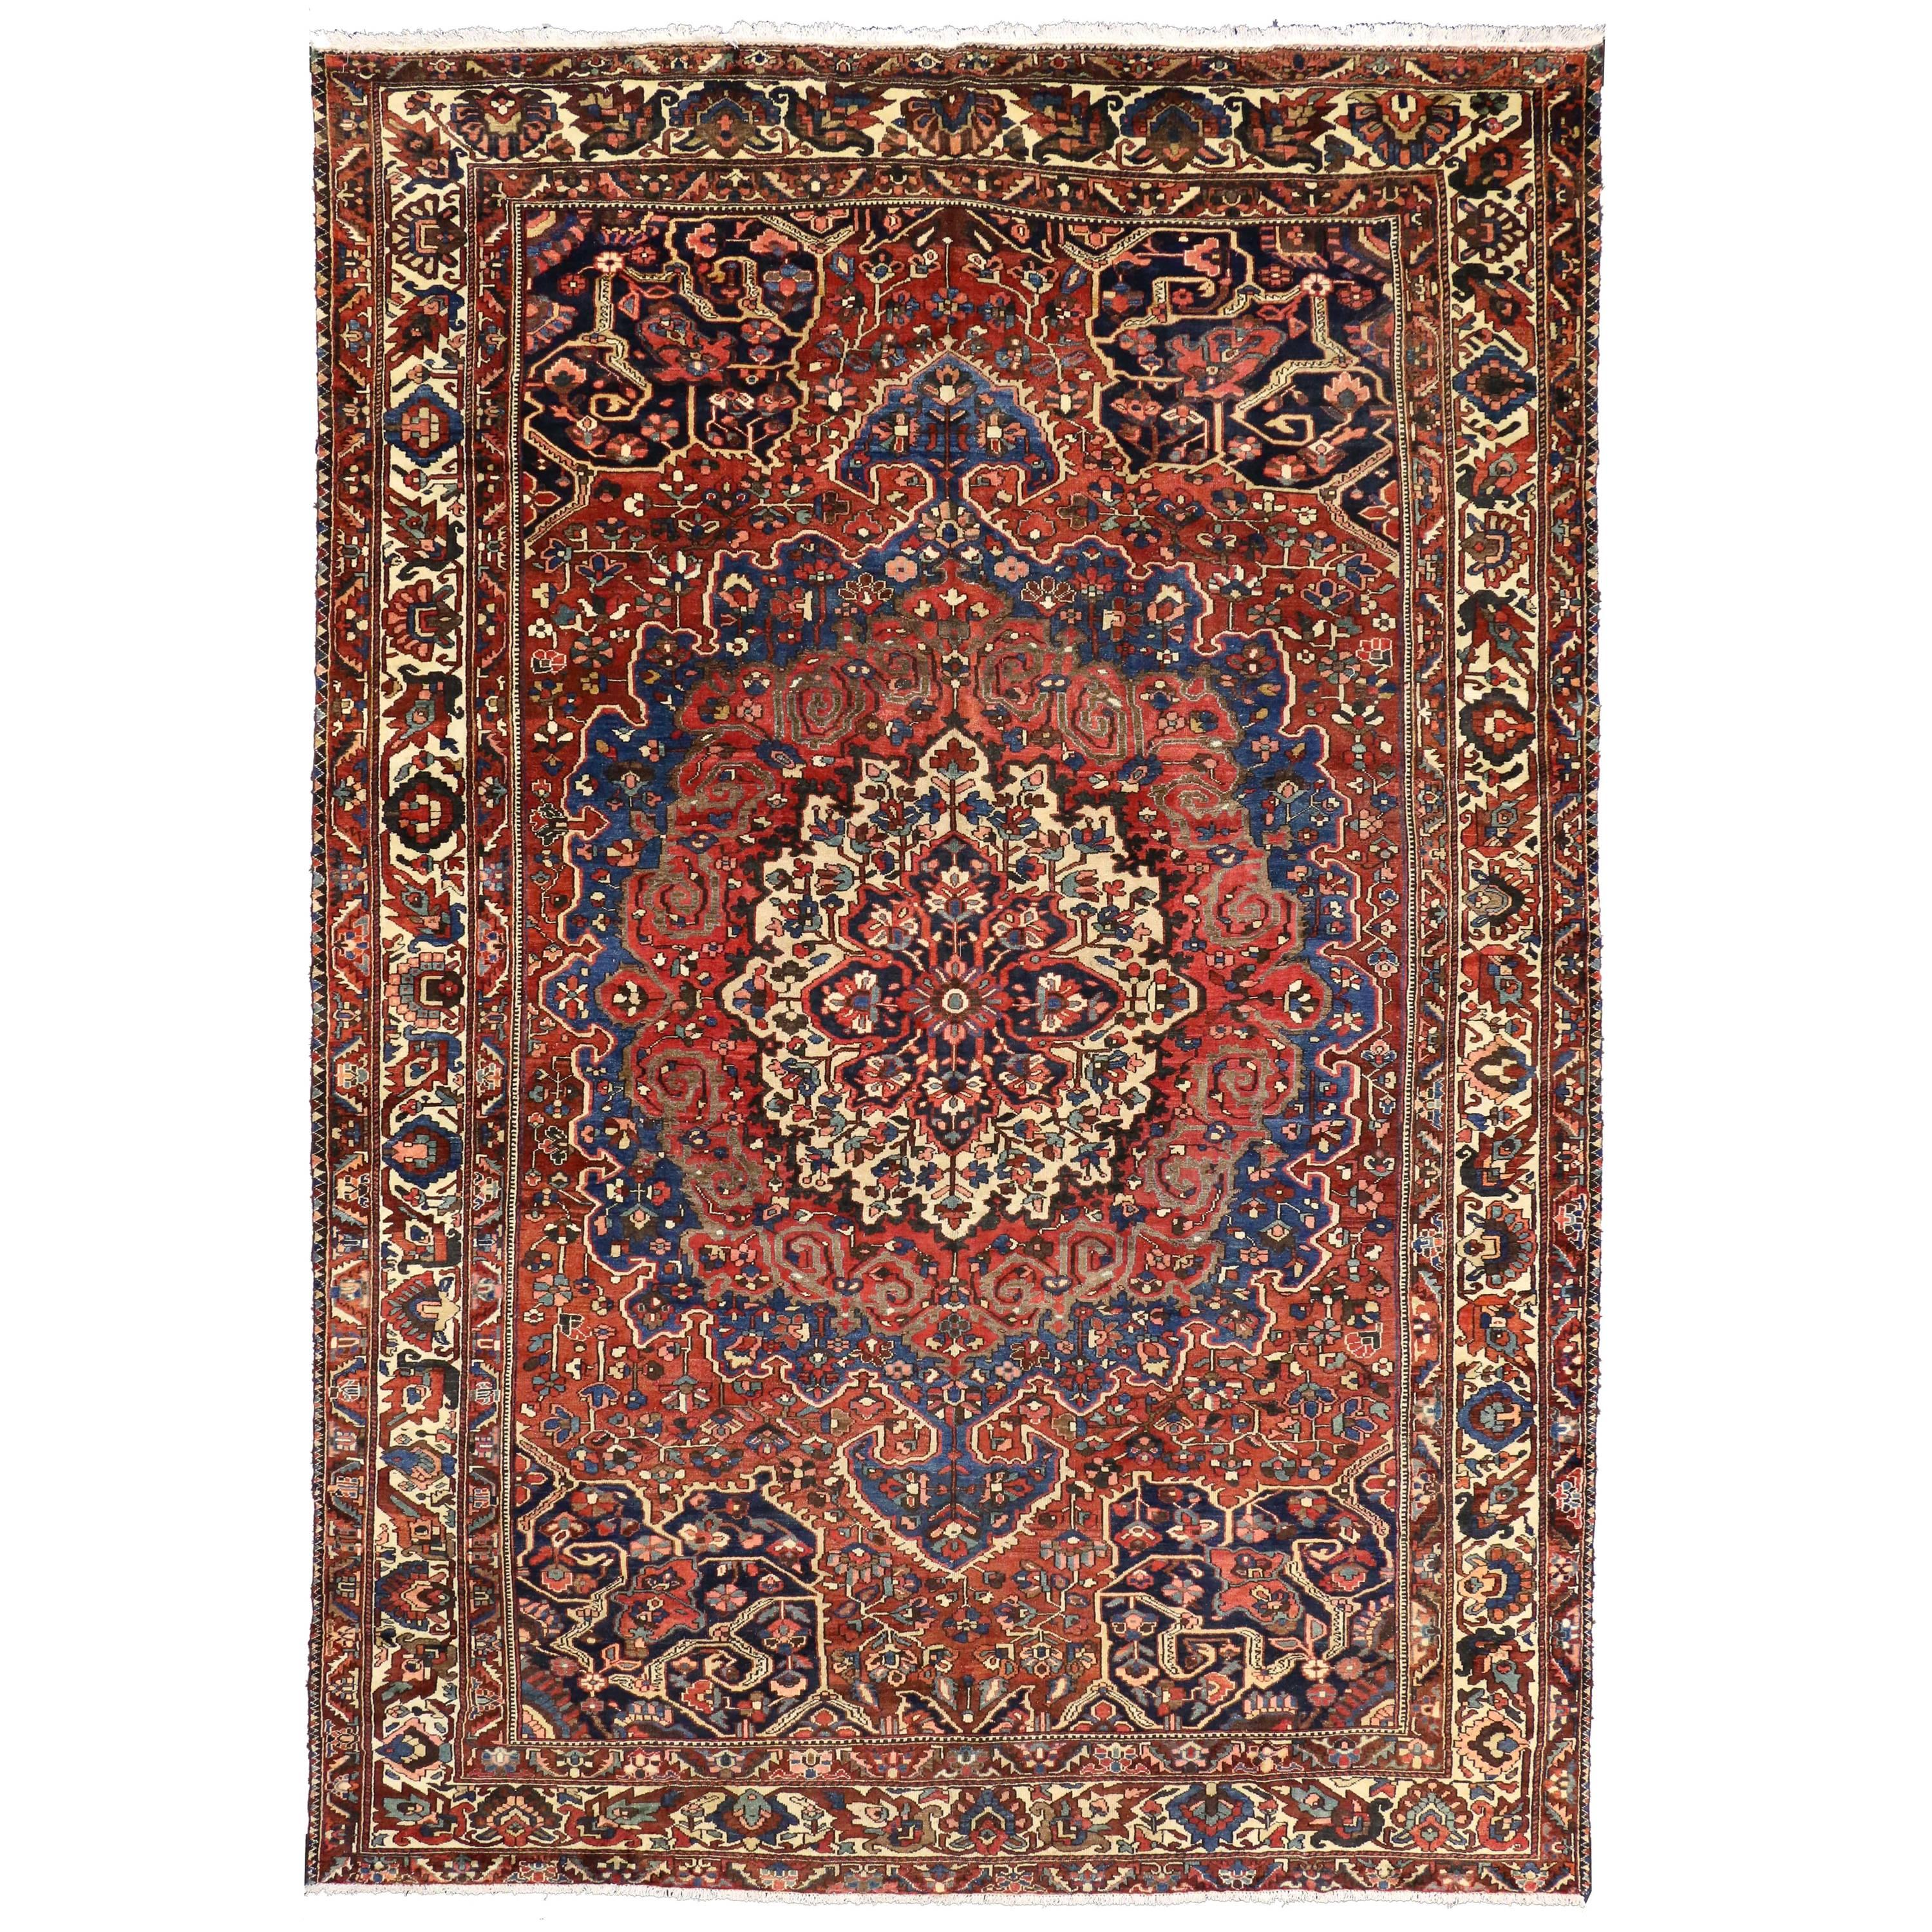 Antique Persian Bakhtiari Rug with Traditional Modern Style